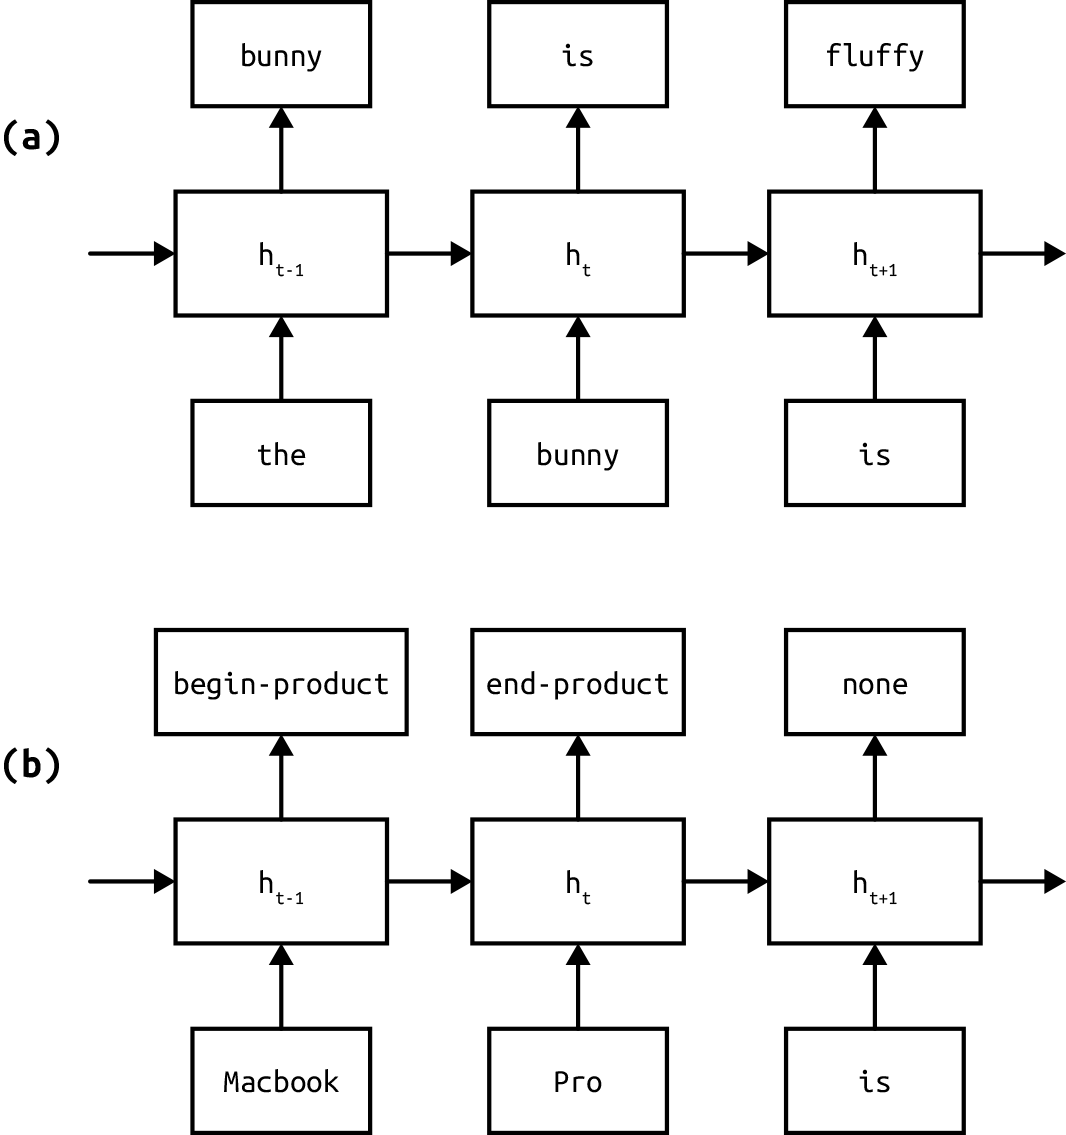 Two examples of sequence prediction tasks: (a) language modeling, in which the task is to predict the next word in a sequence; and (b) named entity recognition, which aims to predict boundaries of entity strings in text along with their types.